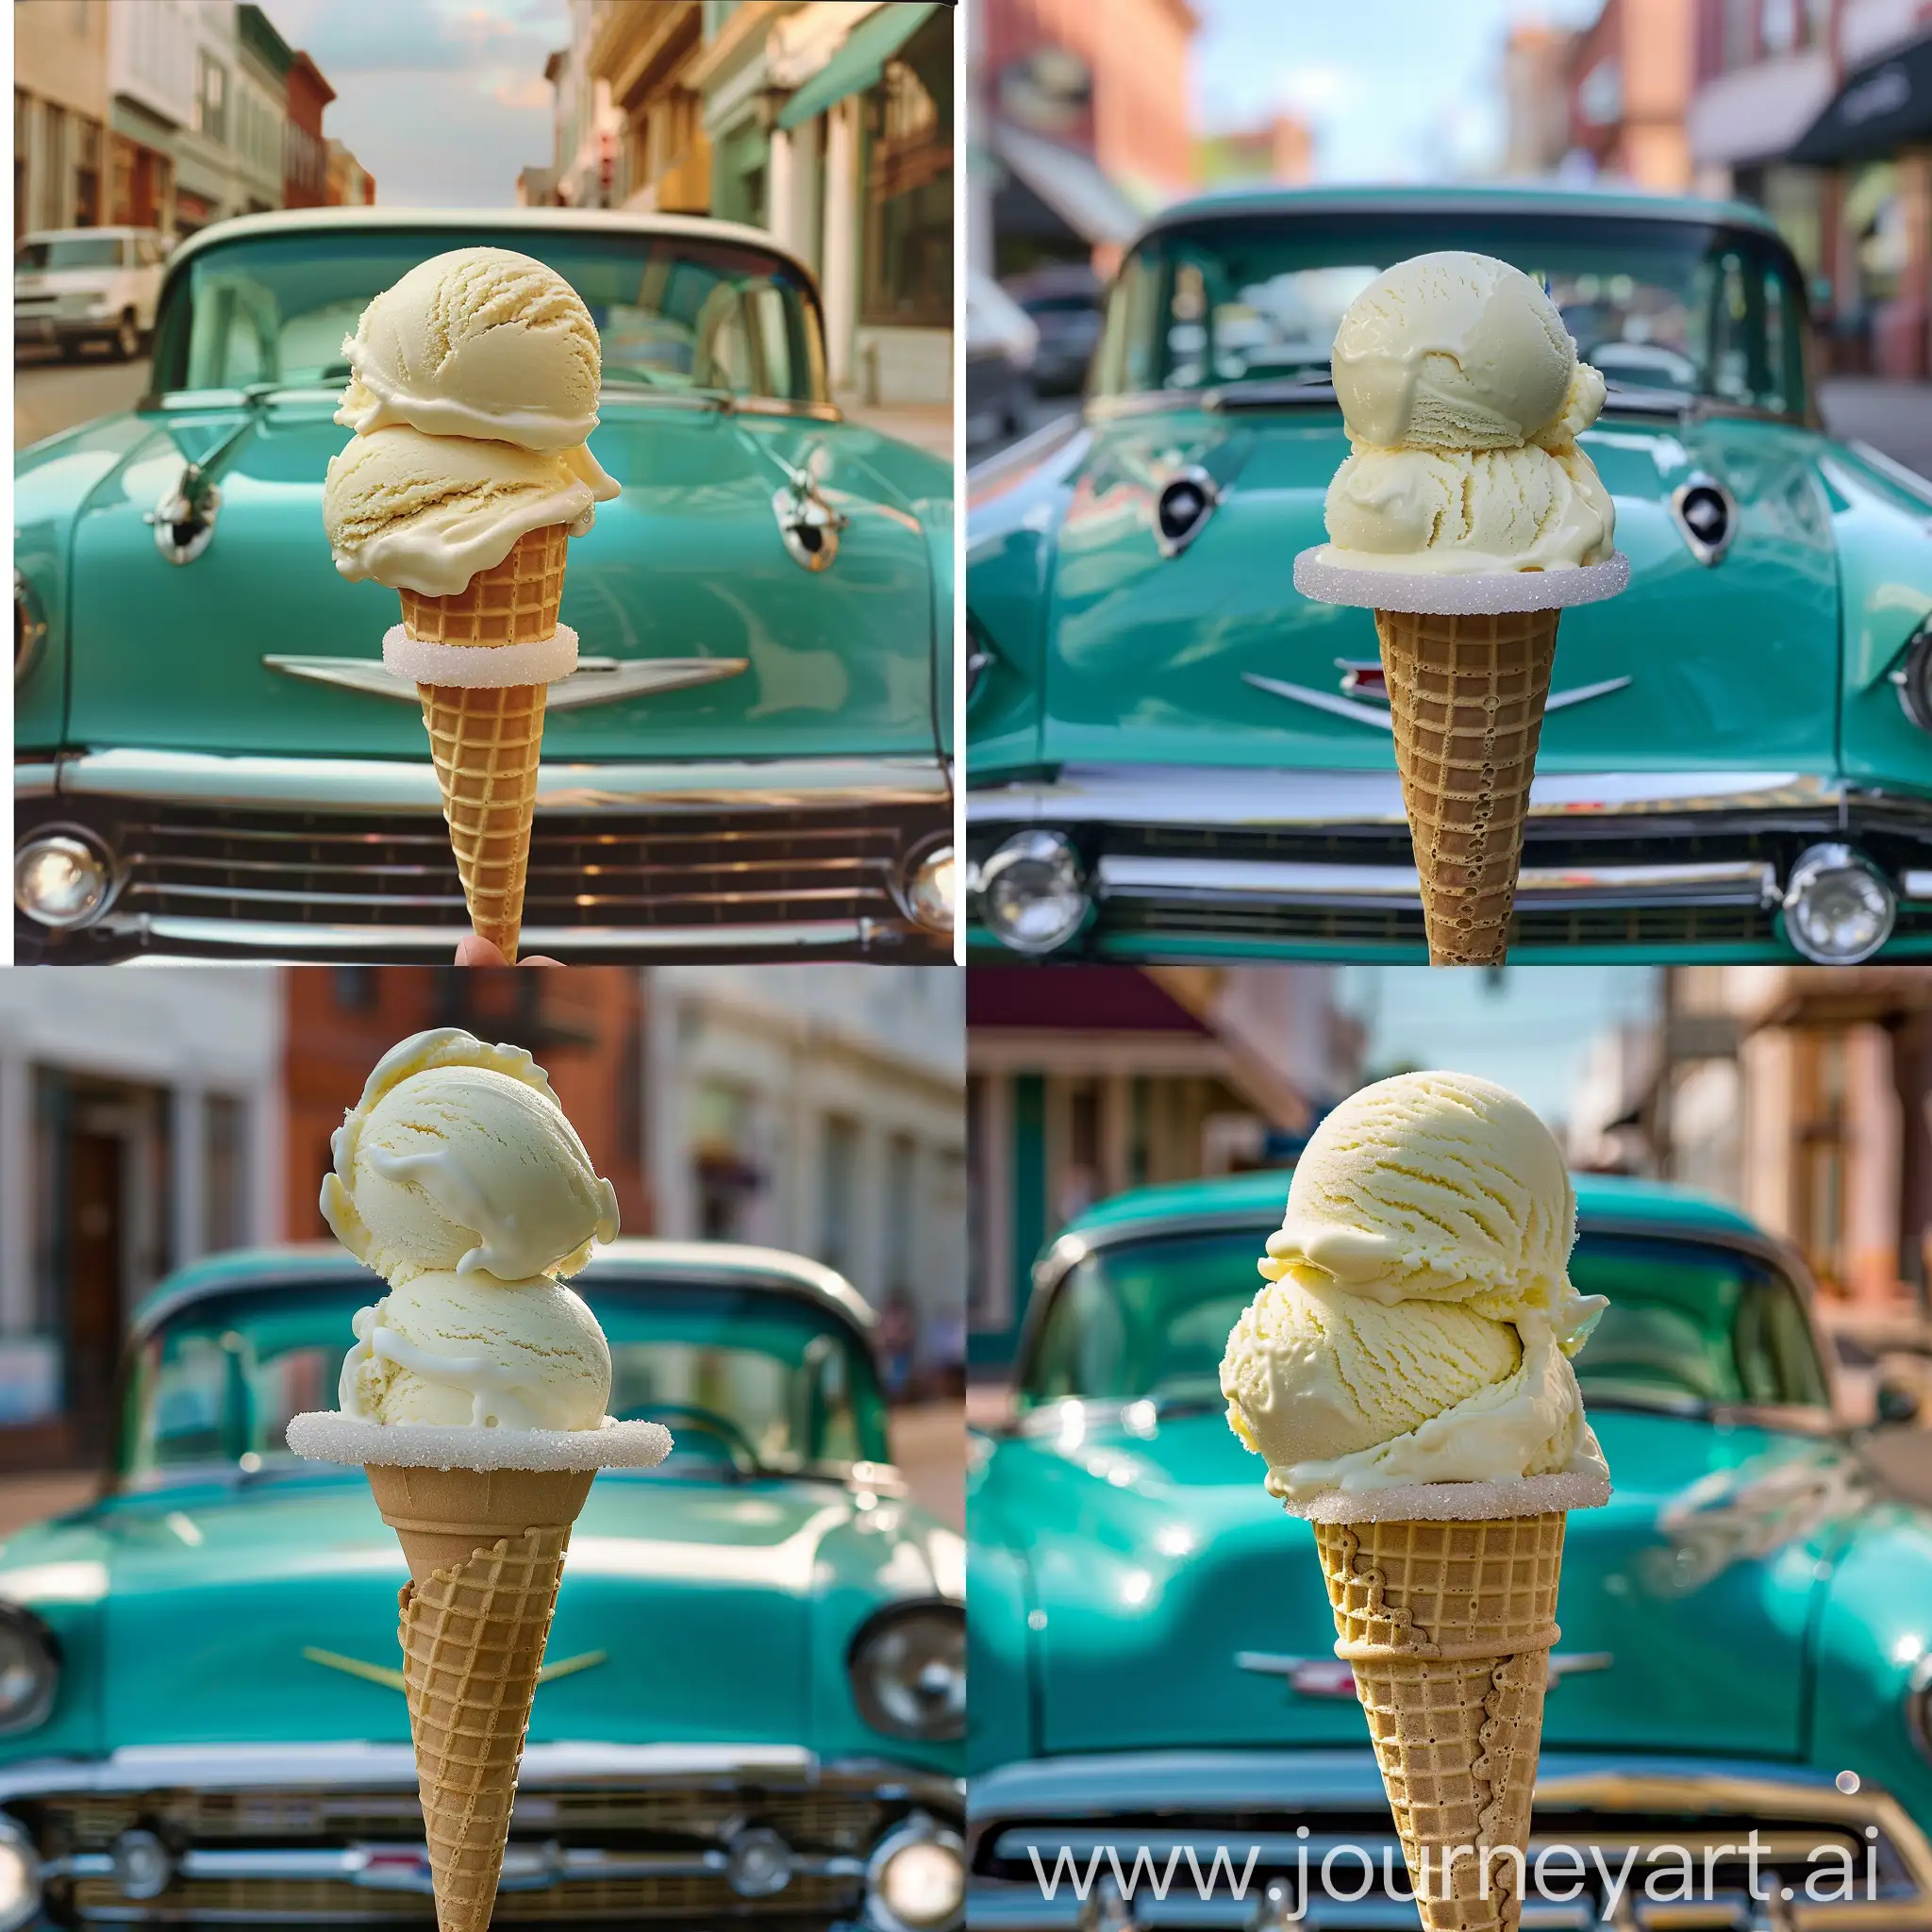 The image features a vividly colored scoop of vanilla ice cream held aloft in a sugar cone, perfectly centered against the background of a classic car. The vehicle, reminiscent of designs from the 1950s or 1960s, boasts a glossy turquoise finish with chrome accents around the headlights, grille, and bumper, which gleam under soft lighting. The ice cream, with its creamy texture and peaks, appears freshly scooped, indicative of a leisurely or indulgent moment. Its position in the foreground, along with the brightly contrasting turquoise backdrop of the car, draws the viewer's eye to the juxtaposition of the treat against the vintage automotive design. Both subjects are situated in what appears to be a tranquil outdoor setting, suggested by the natural lighting and the glimpse of building facades and pavement in the background. This nostalgic scene evokes a sense of timeless enjoyment, combining classic Americana with a simple pleasure that transcends eras.